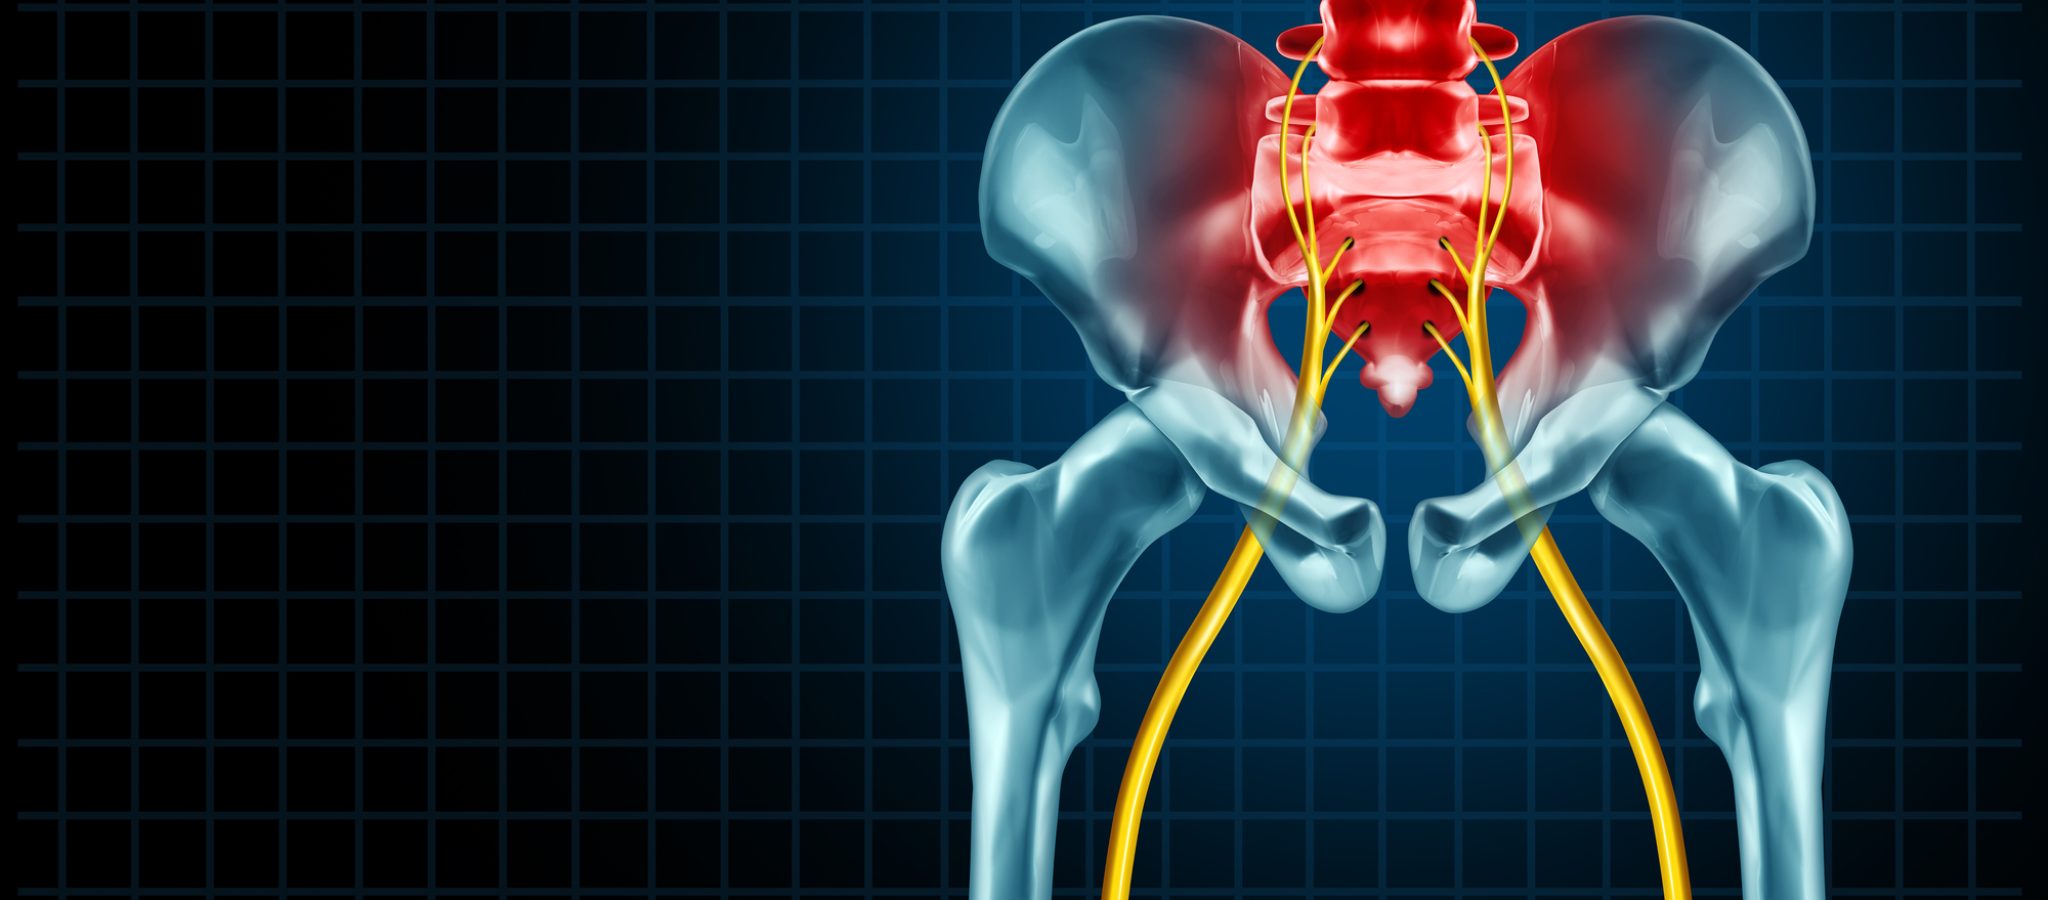 Painful sciatica nerve symptom and pain diagnosis as a medical concept for a disease causing physical problems with 3D illustration elements.